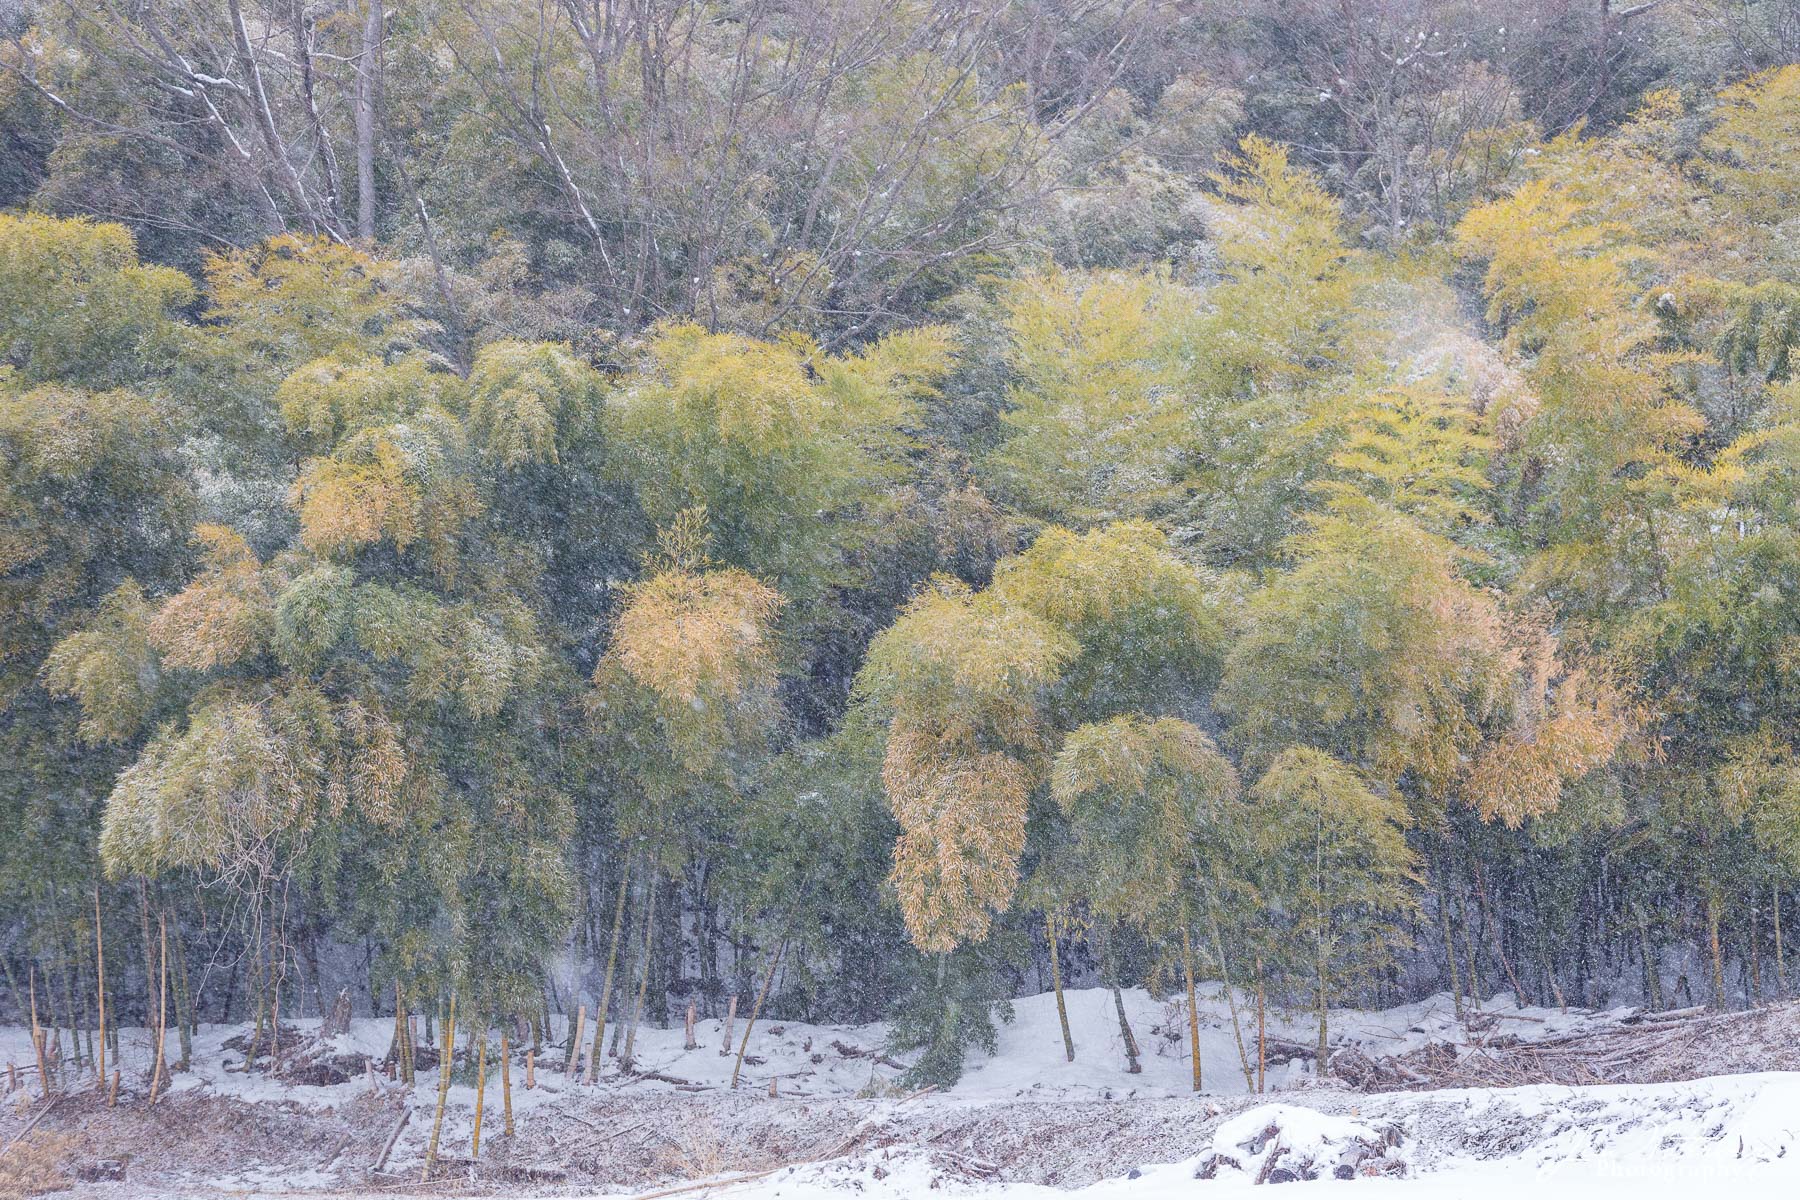 A forest of trees, dusted with newly fallen snow, in the town of Yamanouchi in Nagano Prefecture, Japan.